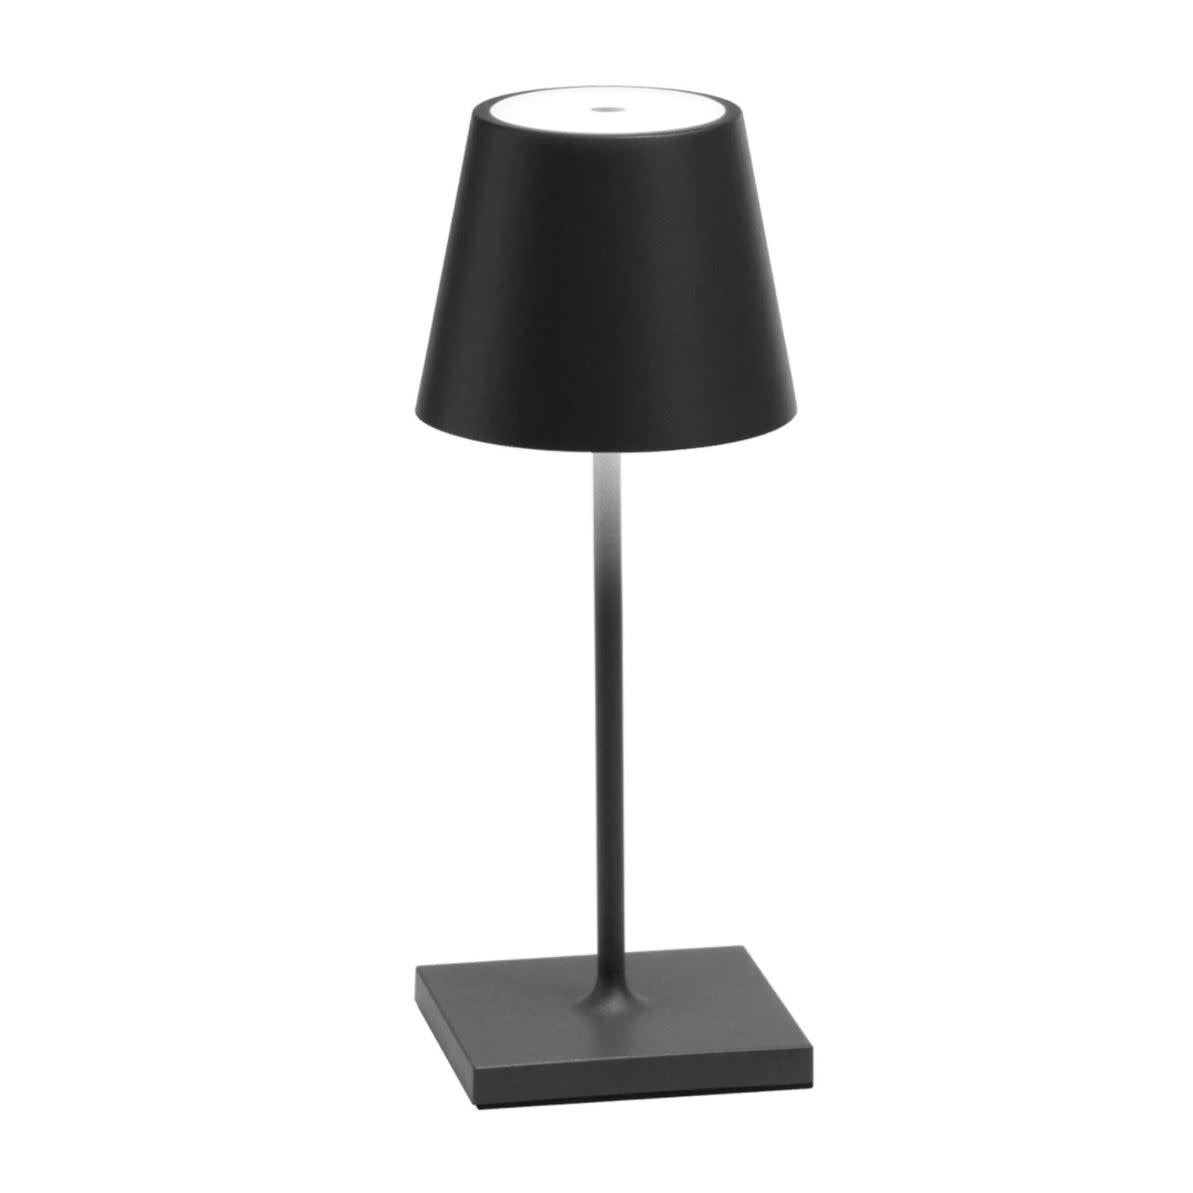 The Poldina Mini Table Lamp by Ai Lati Lights for Zafferano features a sleek and small body and offers a crisp and bright light to its setting. Ideal for indoor and outdoor settings with its 9 hour rechargeable battery life and portable body makes the perfect accent to a space. The fixture is made up of painted aluminium with a polycarbonate diffuser and LED light source. Its square base ensures a sturdy display.